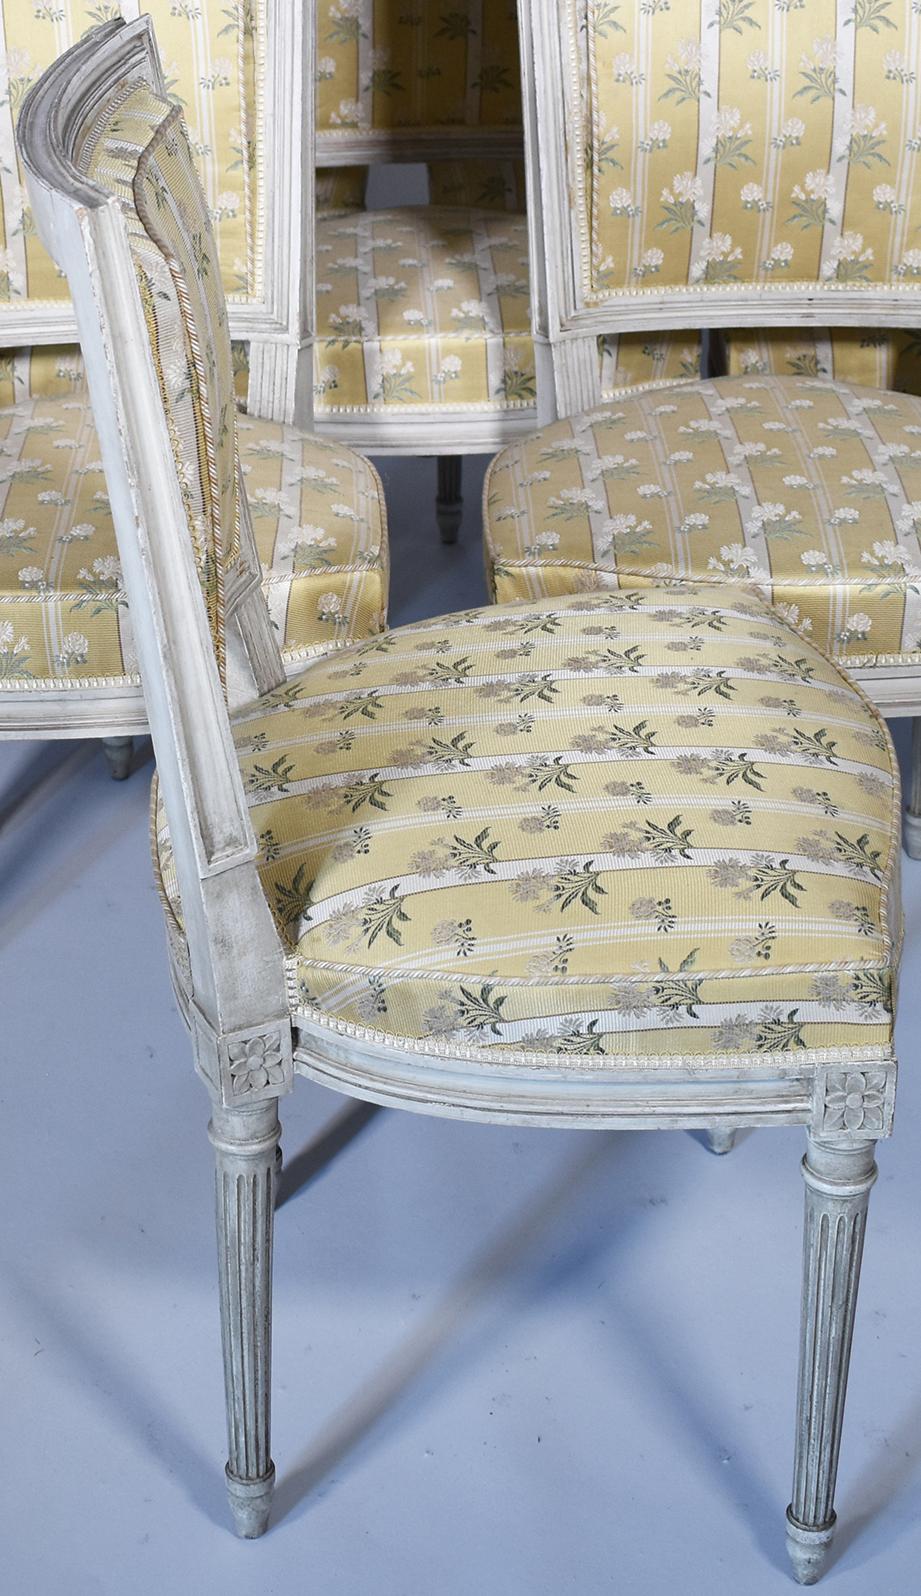 Elegant Louis XVI framed back chairs, featuring pale white patina. Look charming when juxtaposed to modern table or period dining table. Fluted carving on legs and rosettes in corners add detail to the neoclassical style. Reupholstered in black